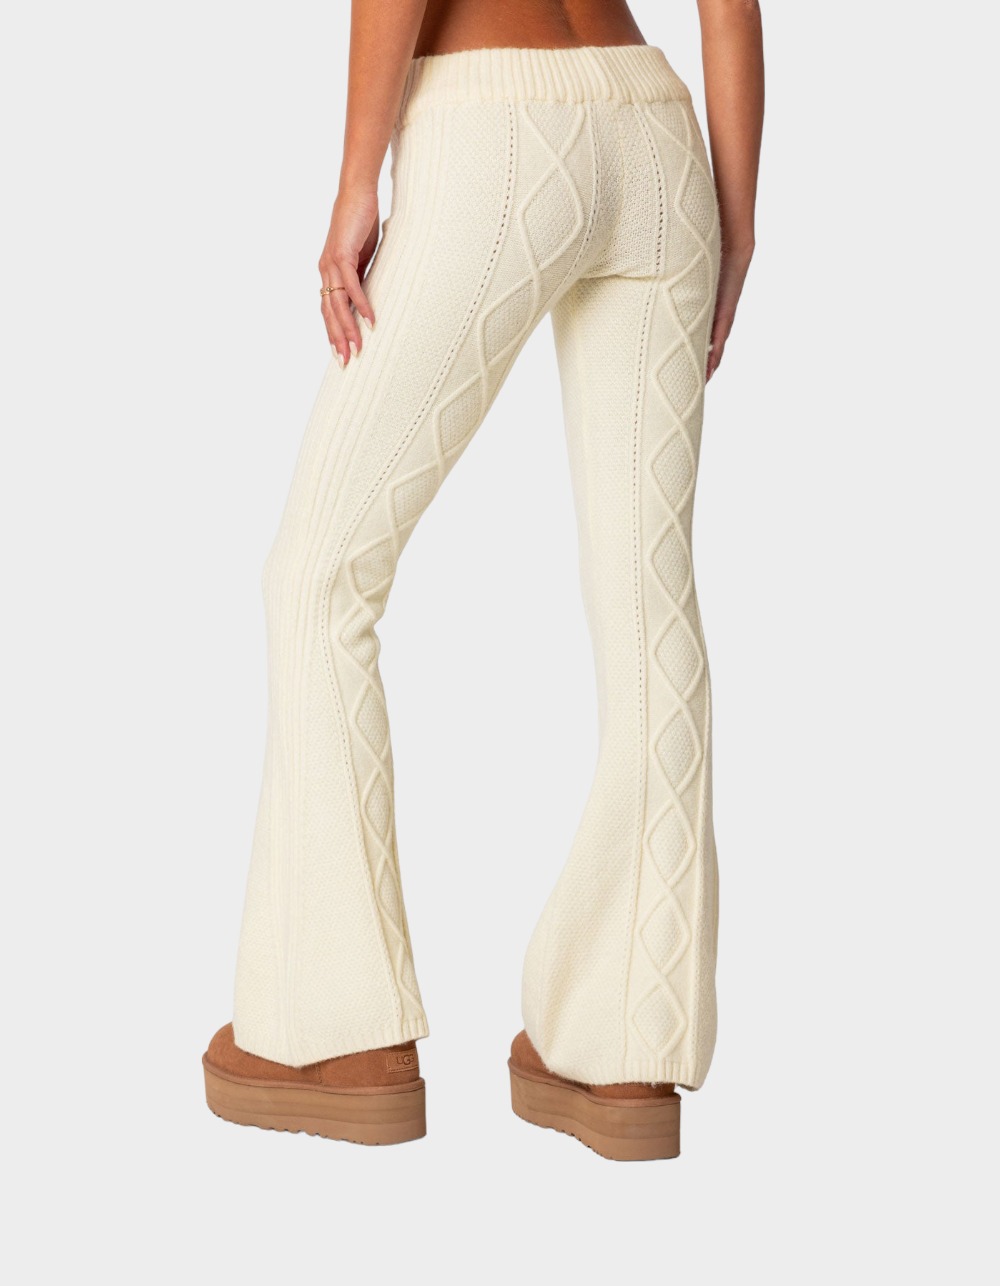 EDIKTED Ray Cable Knit Flared Pants - BEIGE